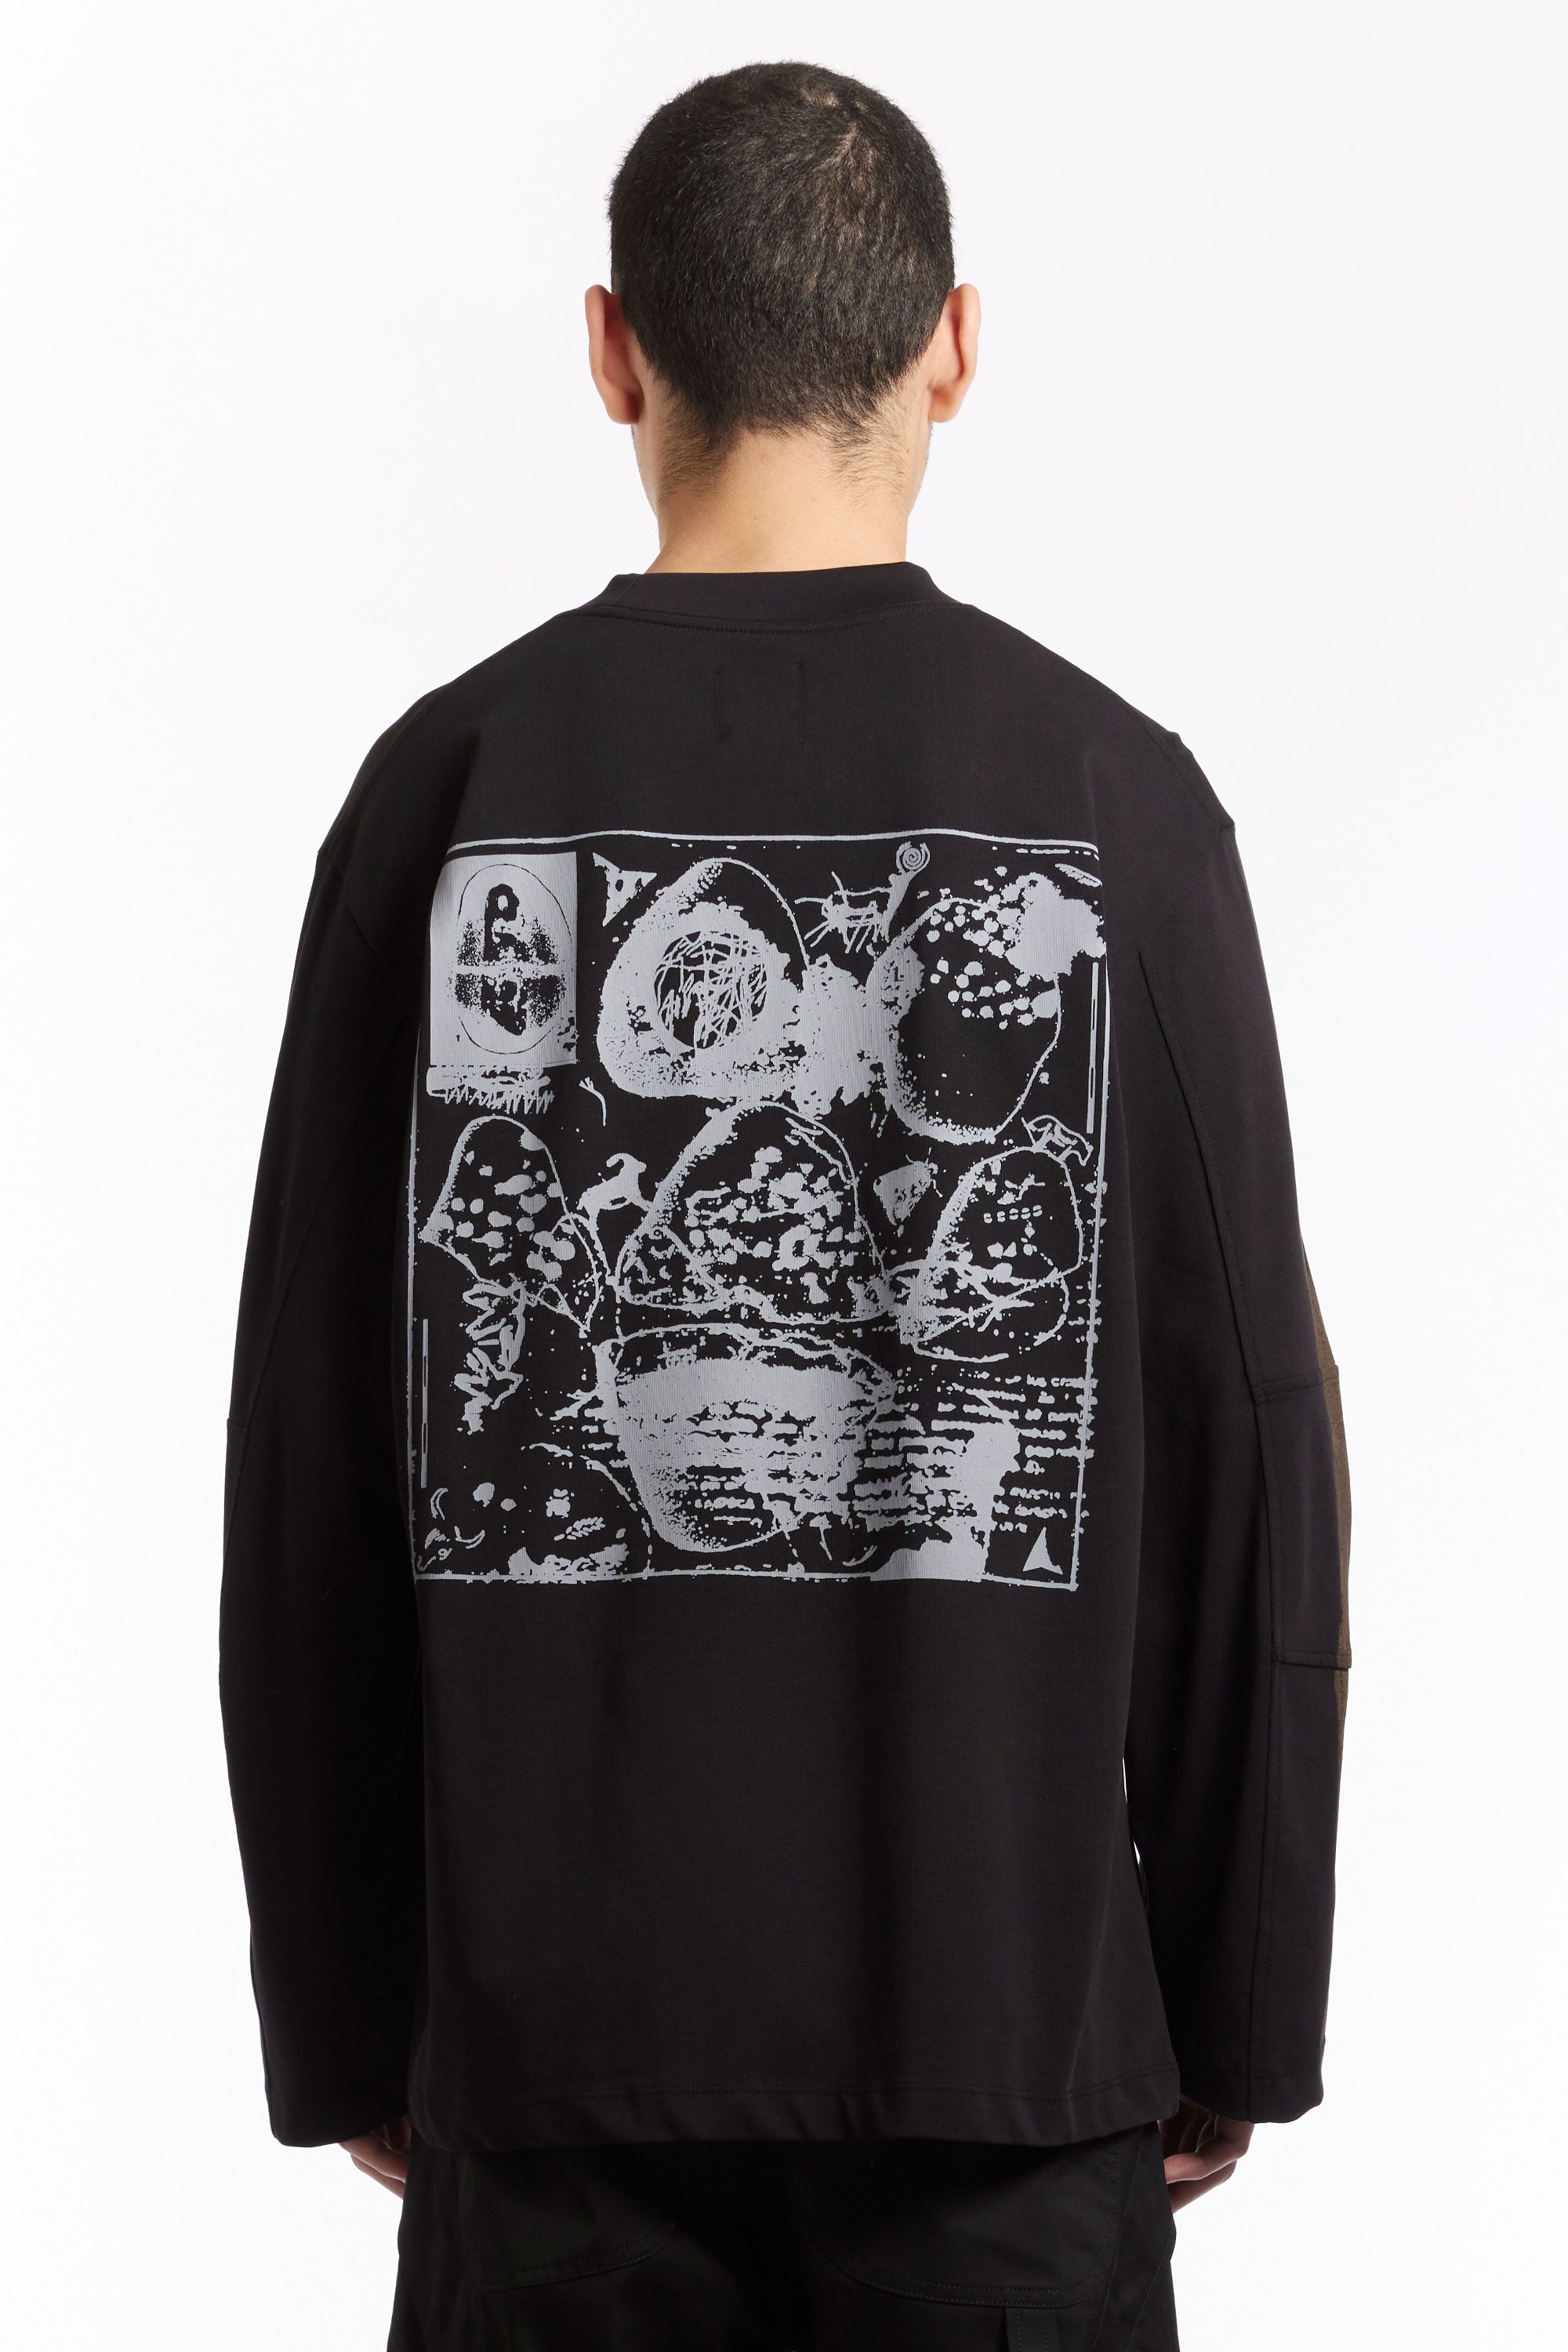 The ROA - BLACK LONGSLEEVE GRAPHIC T-SHIRT  available online with global shipping, and in PAM Stores Melbourne and Sydney.